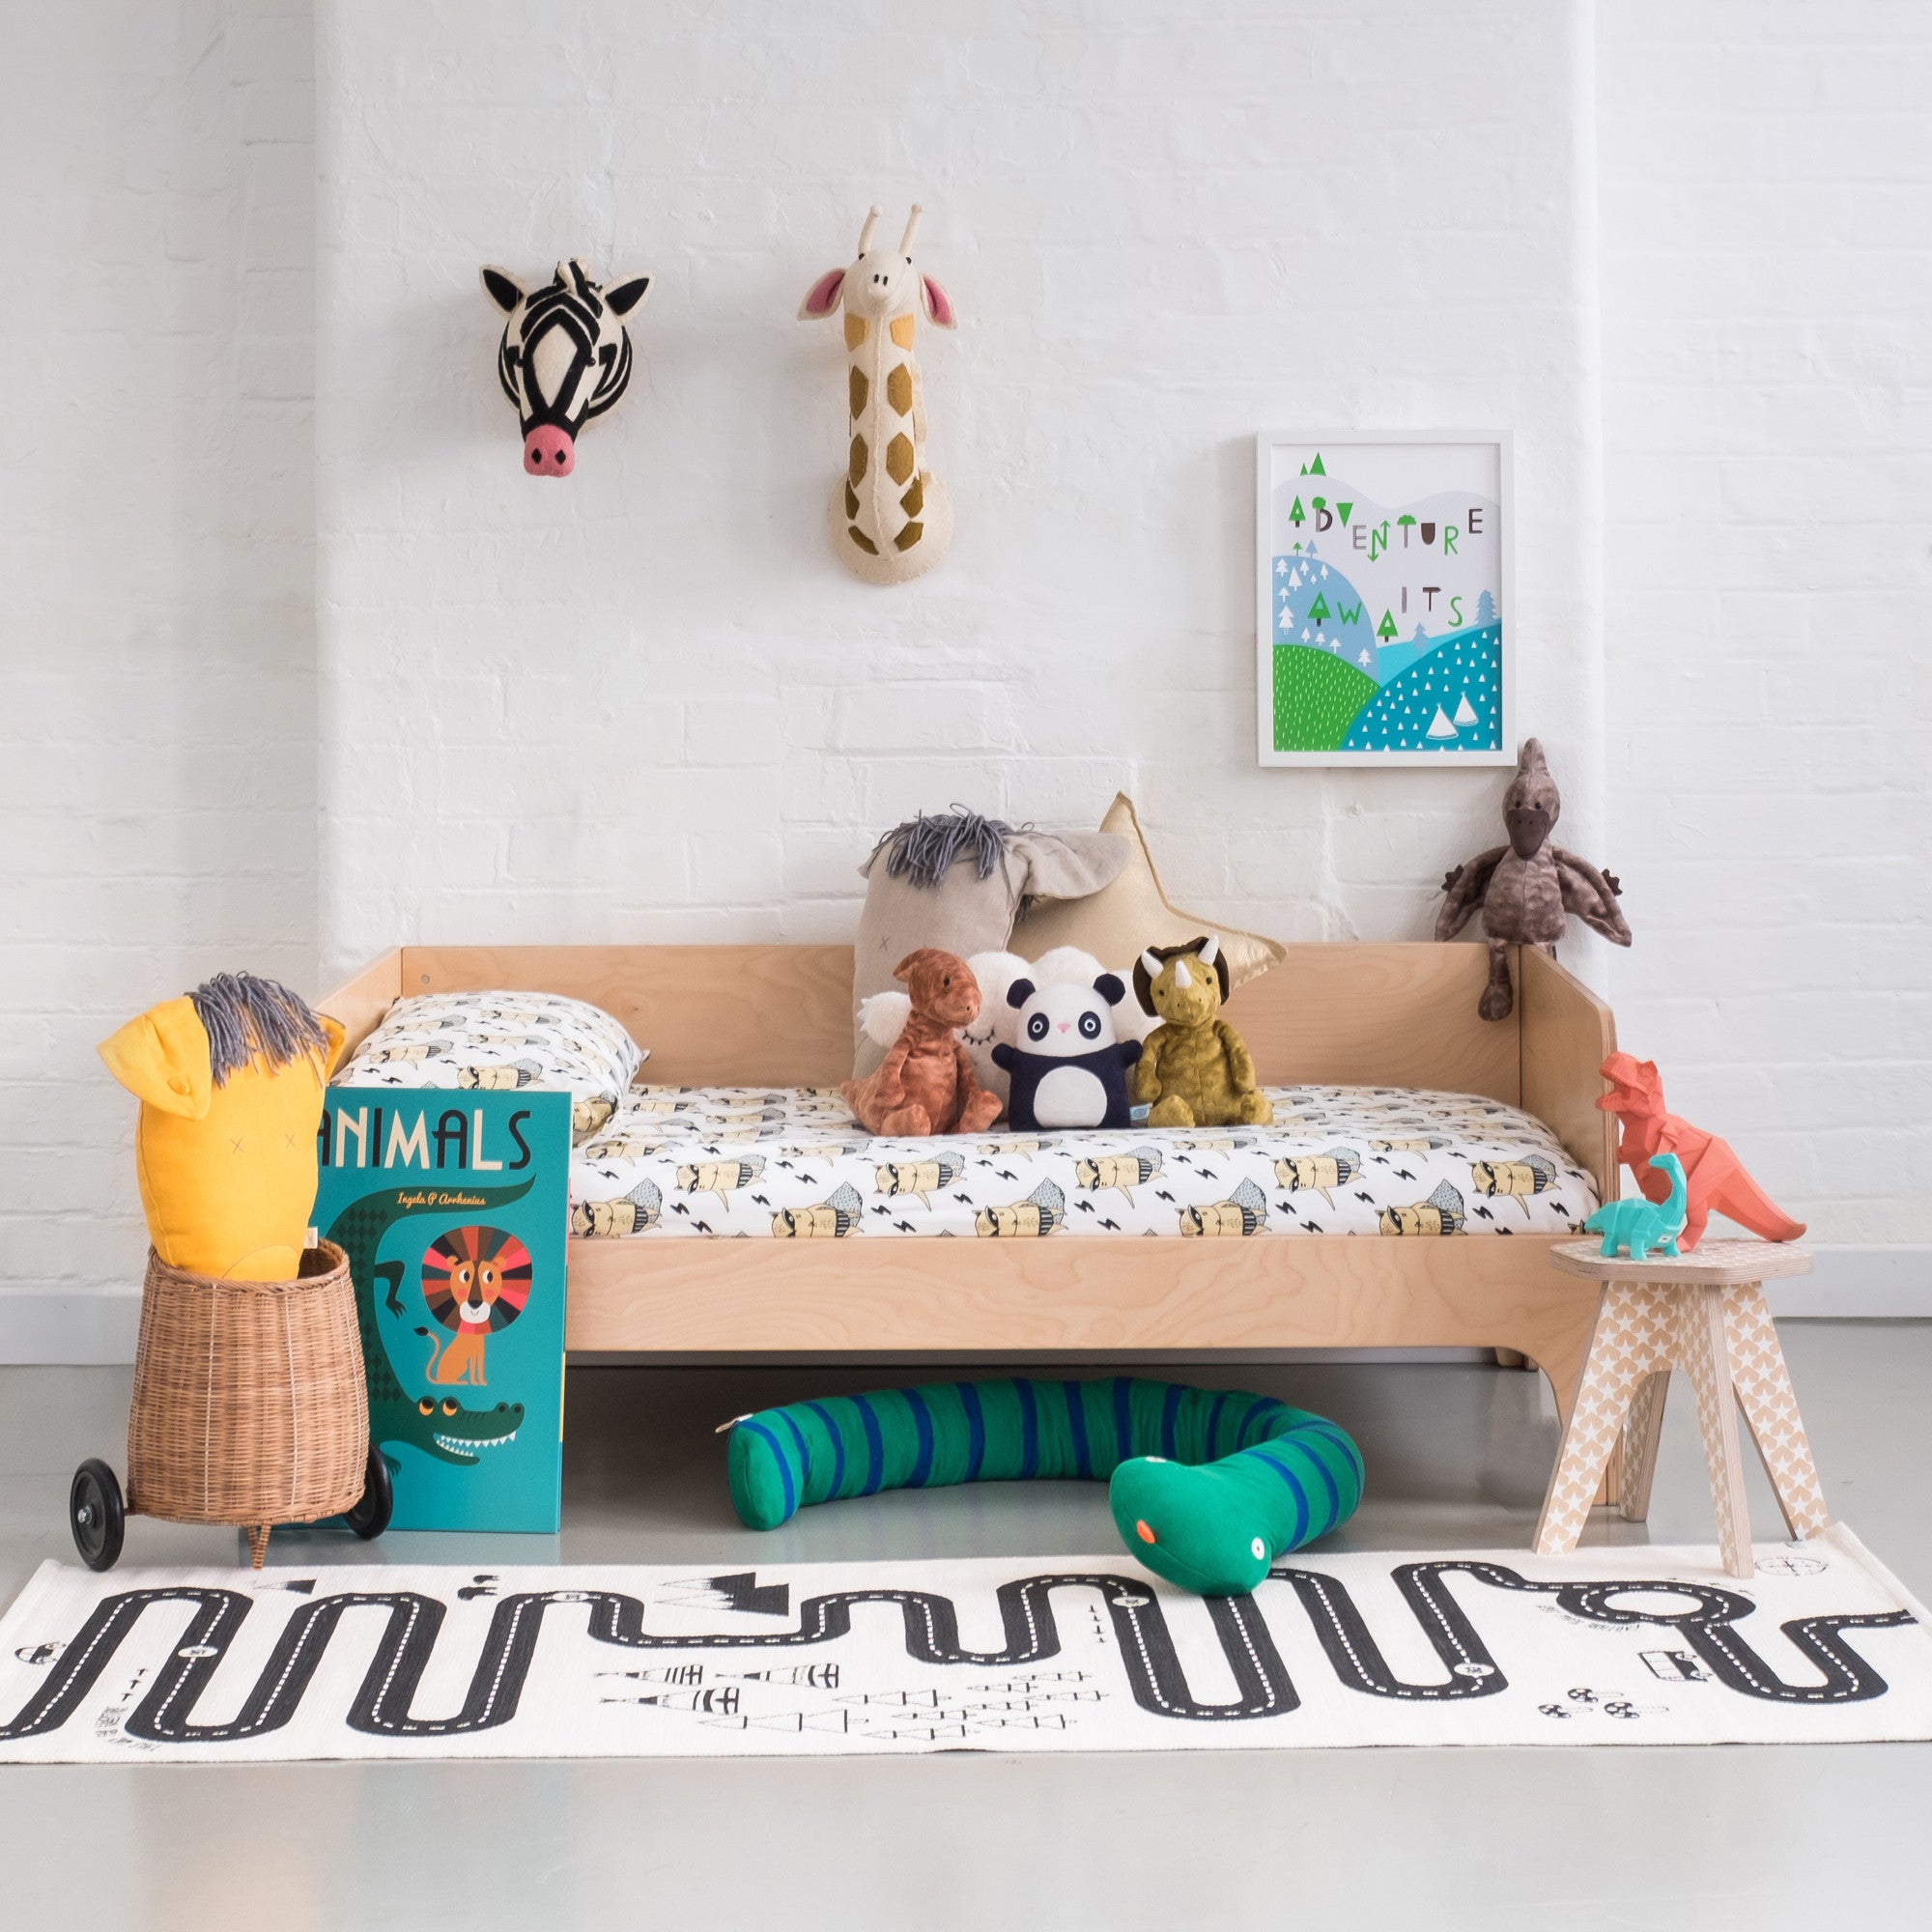 An Animal Adventure, children's bedroom styled by Bobby Rabbit.